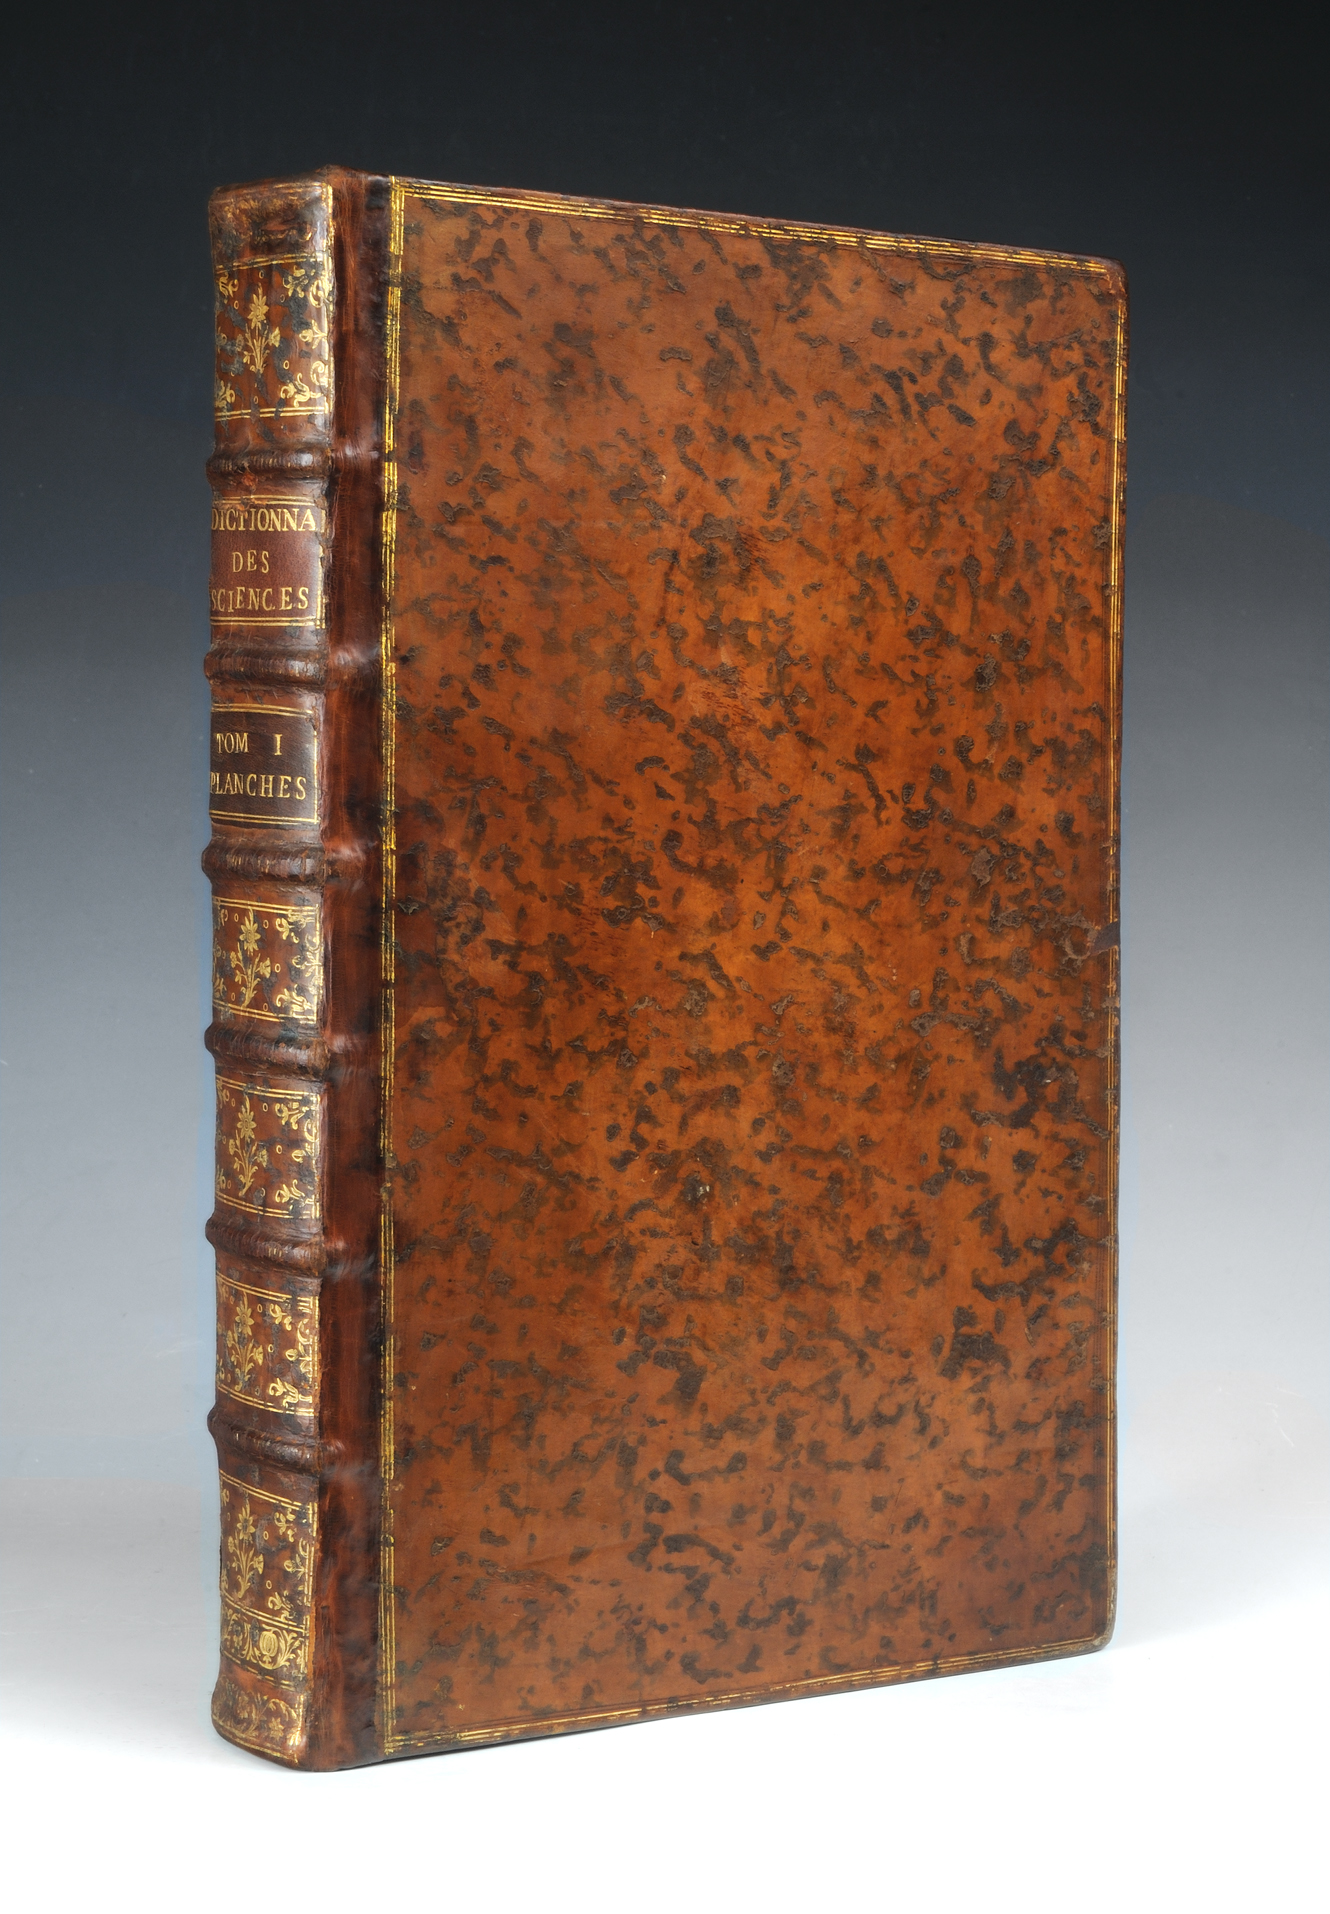 Diderot's Encyclopédie in leather binding